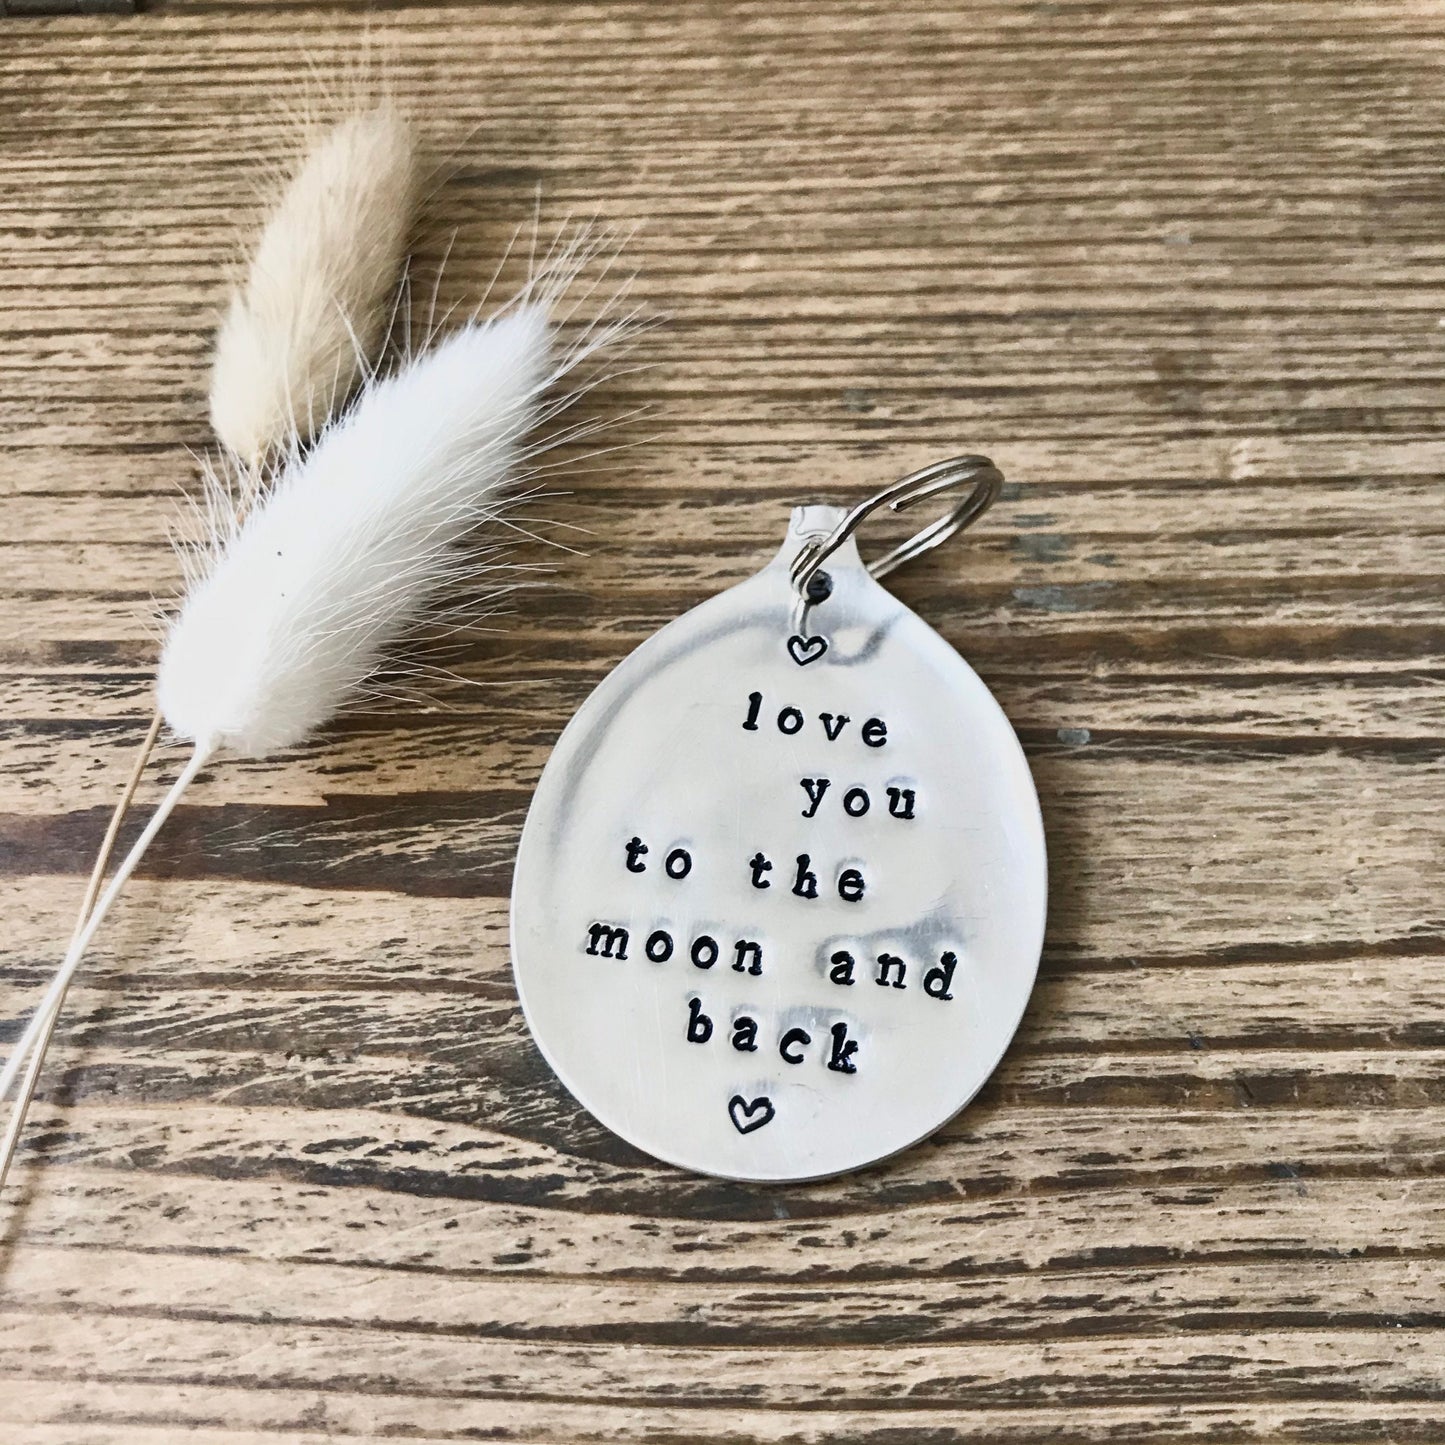 Love You to The Moon and Back - Vintage Spoon Keyring